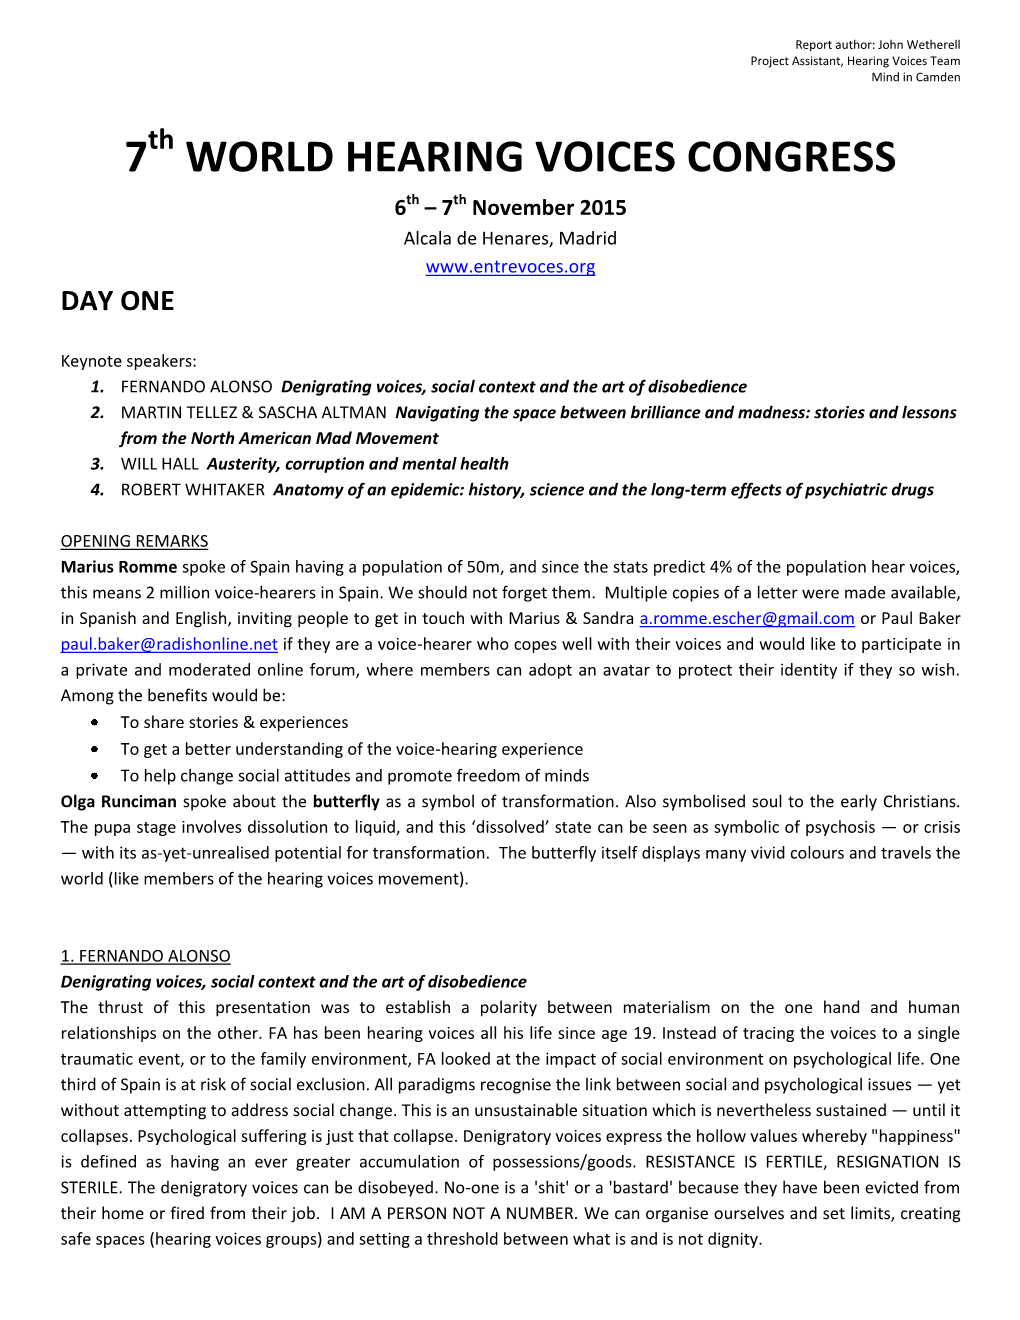 World Hearing Voices Congress Report